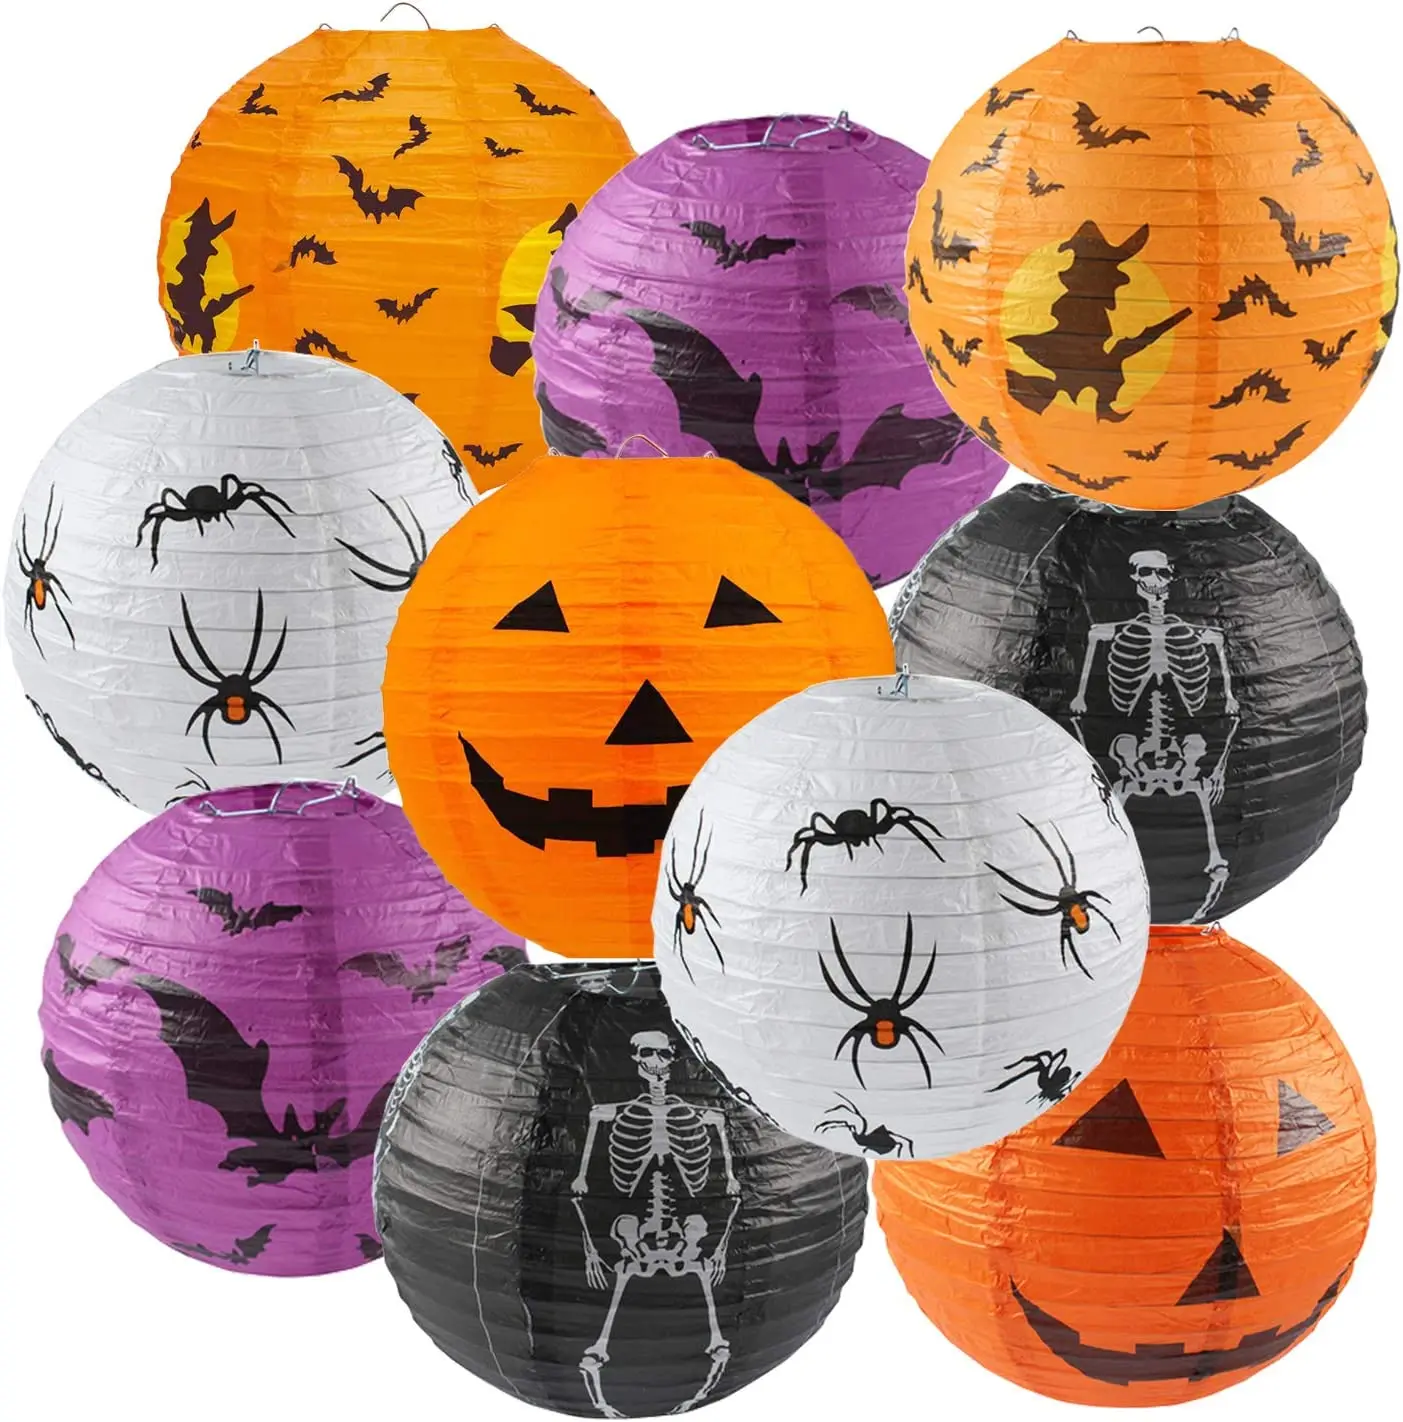 

10PCS Halloween Paper Lanterns Hanging Bar Witch Spider Skeleton Pumpkin for Indoor and Outdoor Halloween Party Home Decor